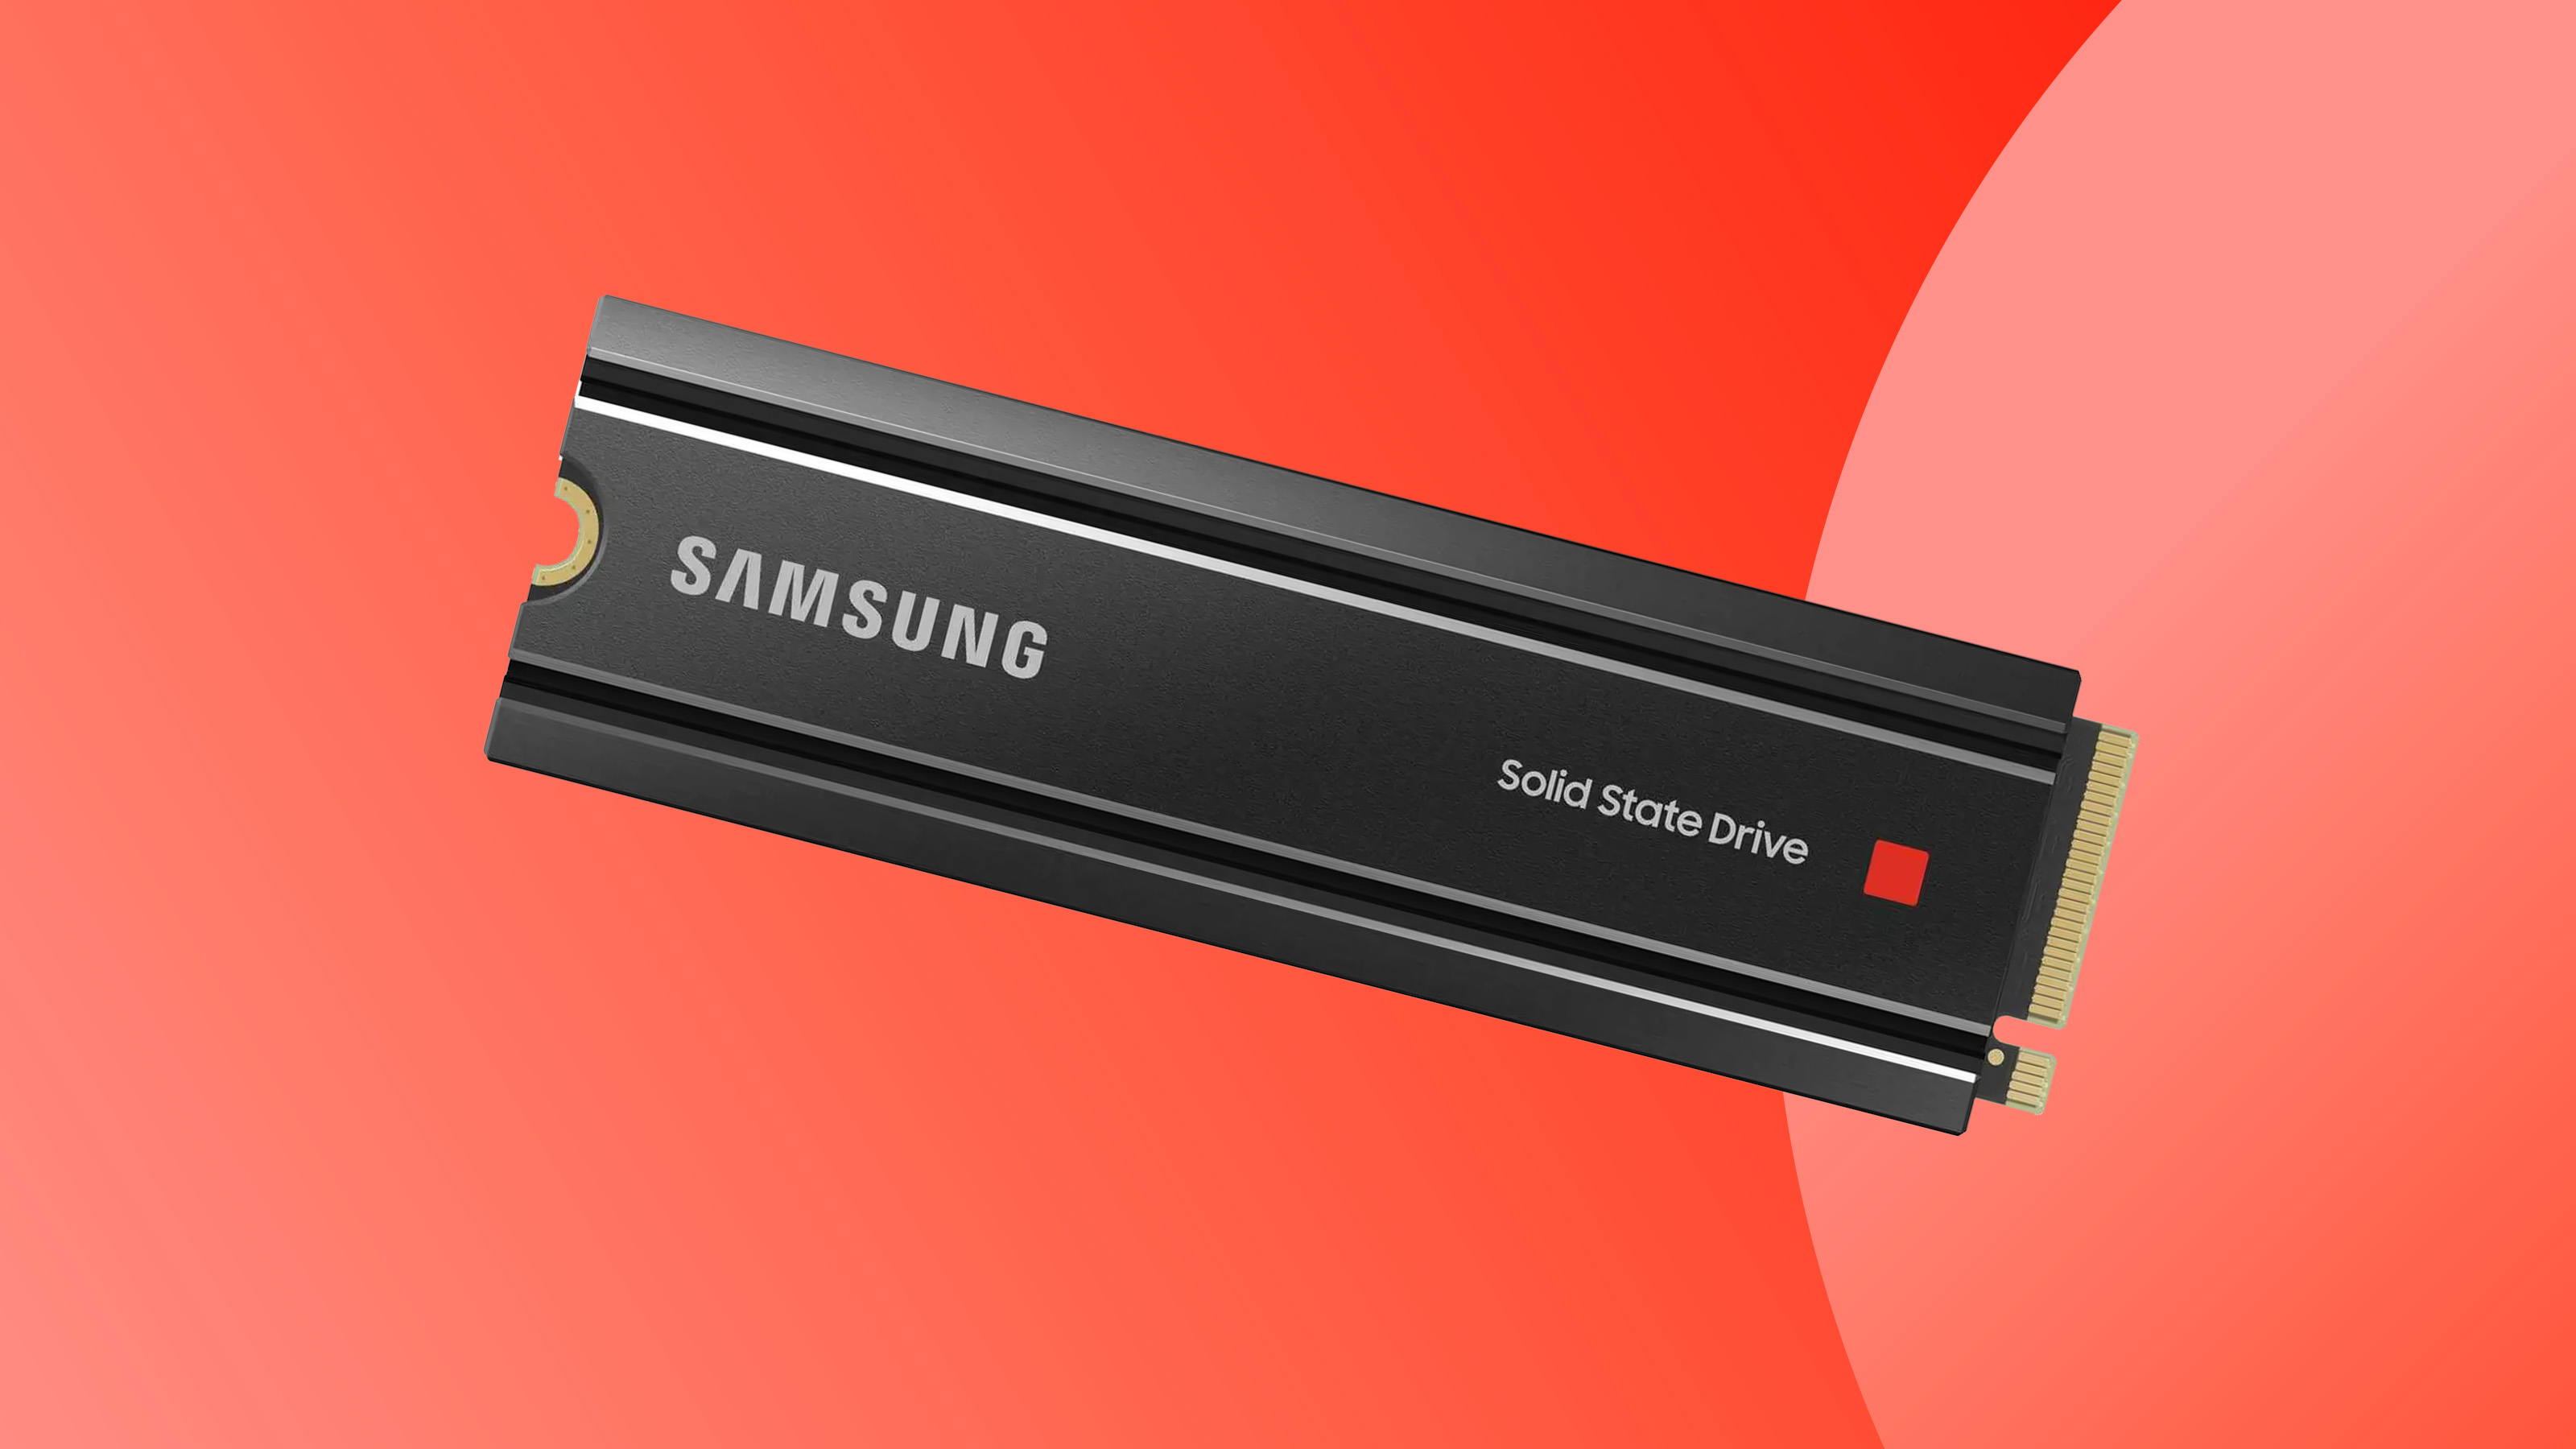 A product shot of the Samsung 980 Pro internal SSD on a colourful background